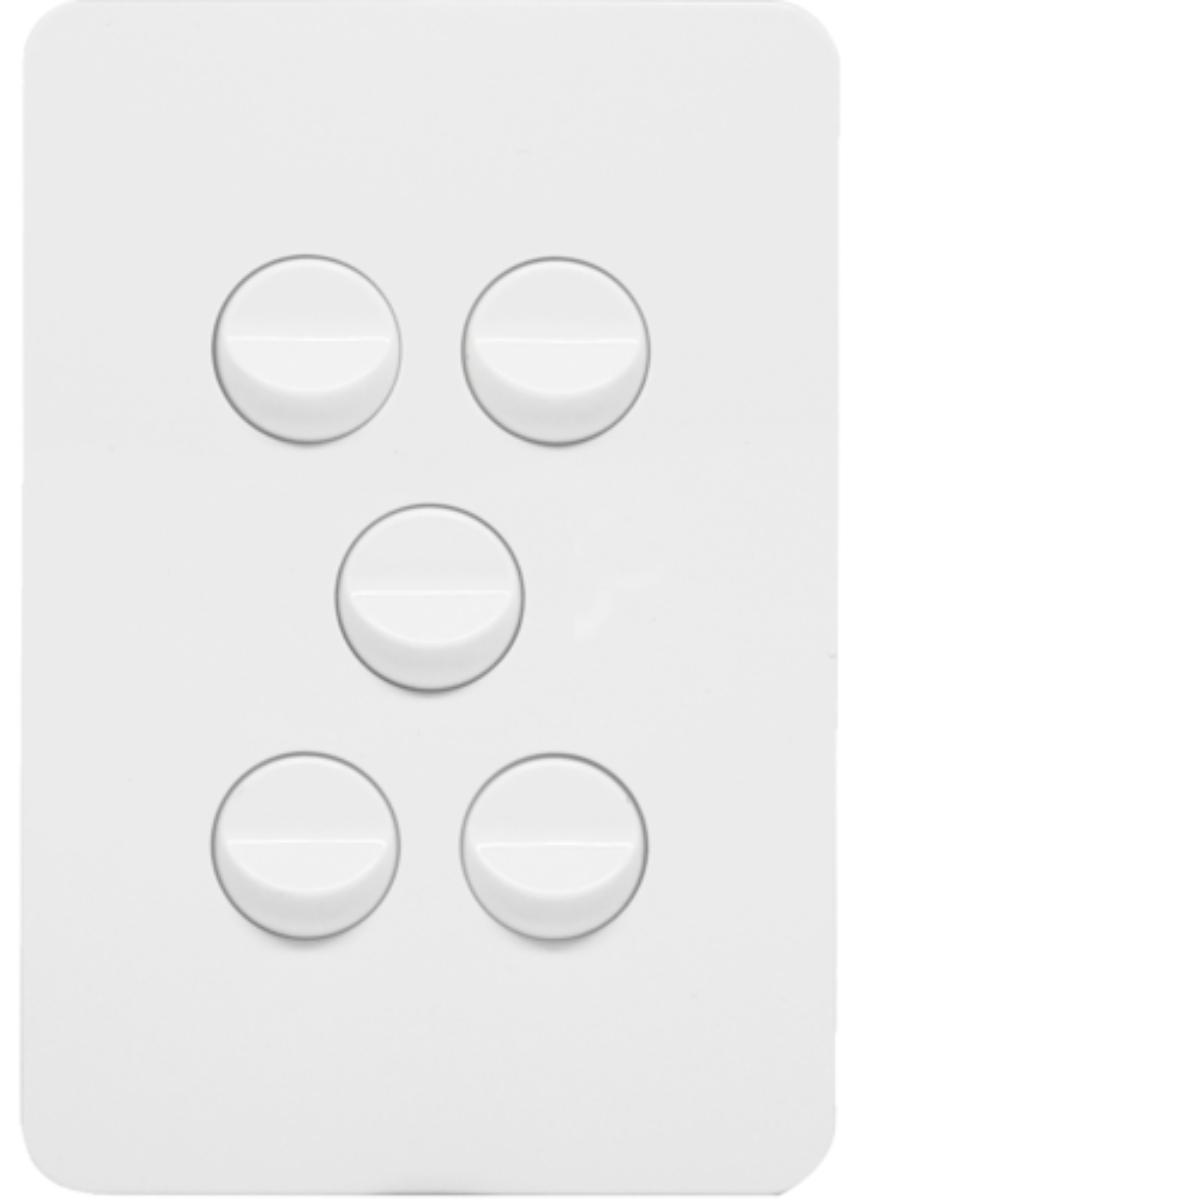 ALLURE 5 GANG SWITCH 16A 2WAY GLOSS WHT